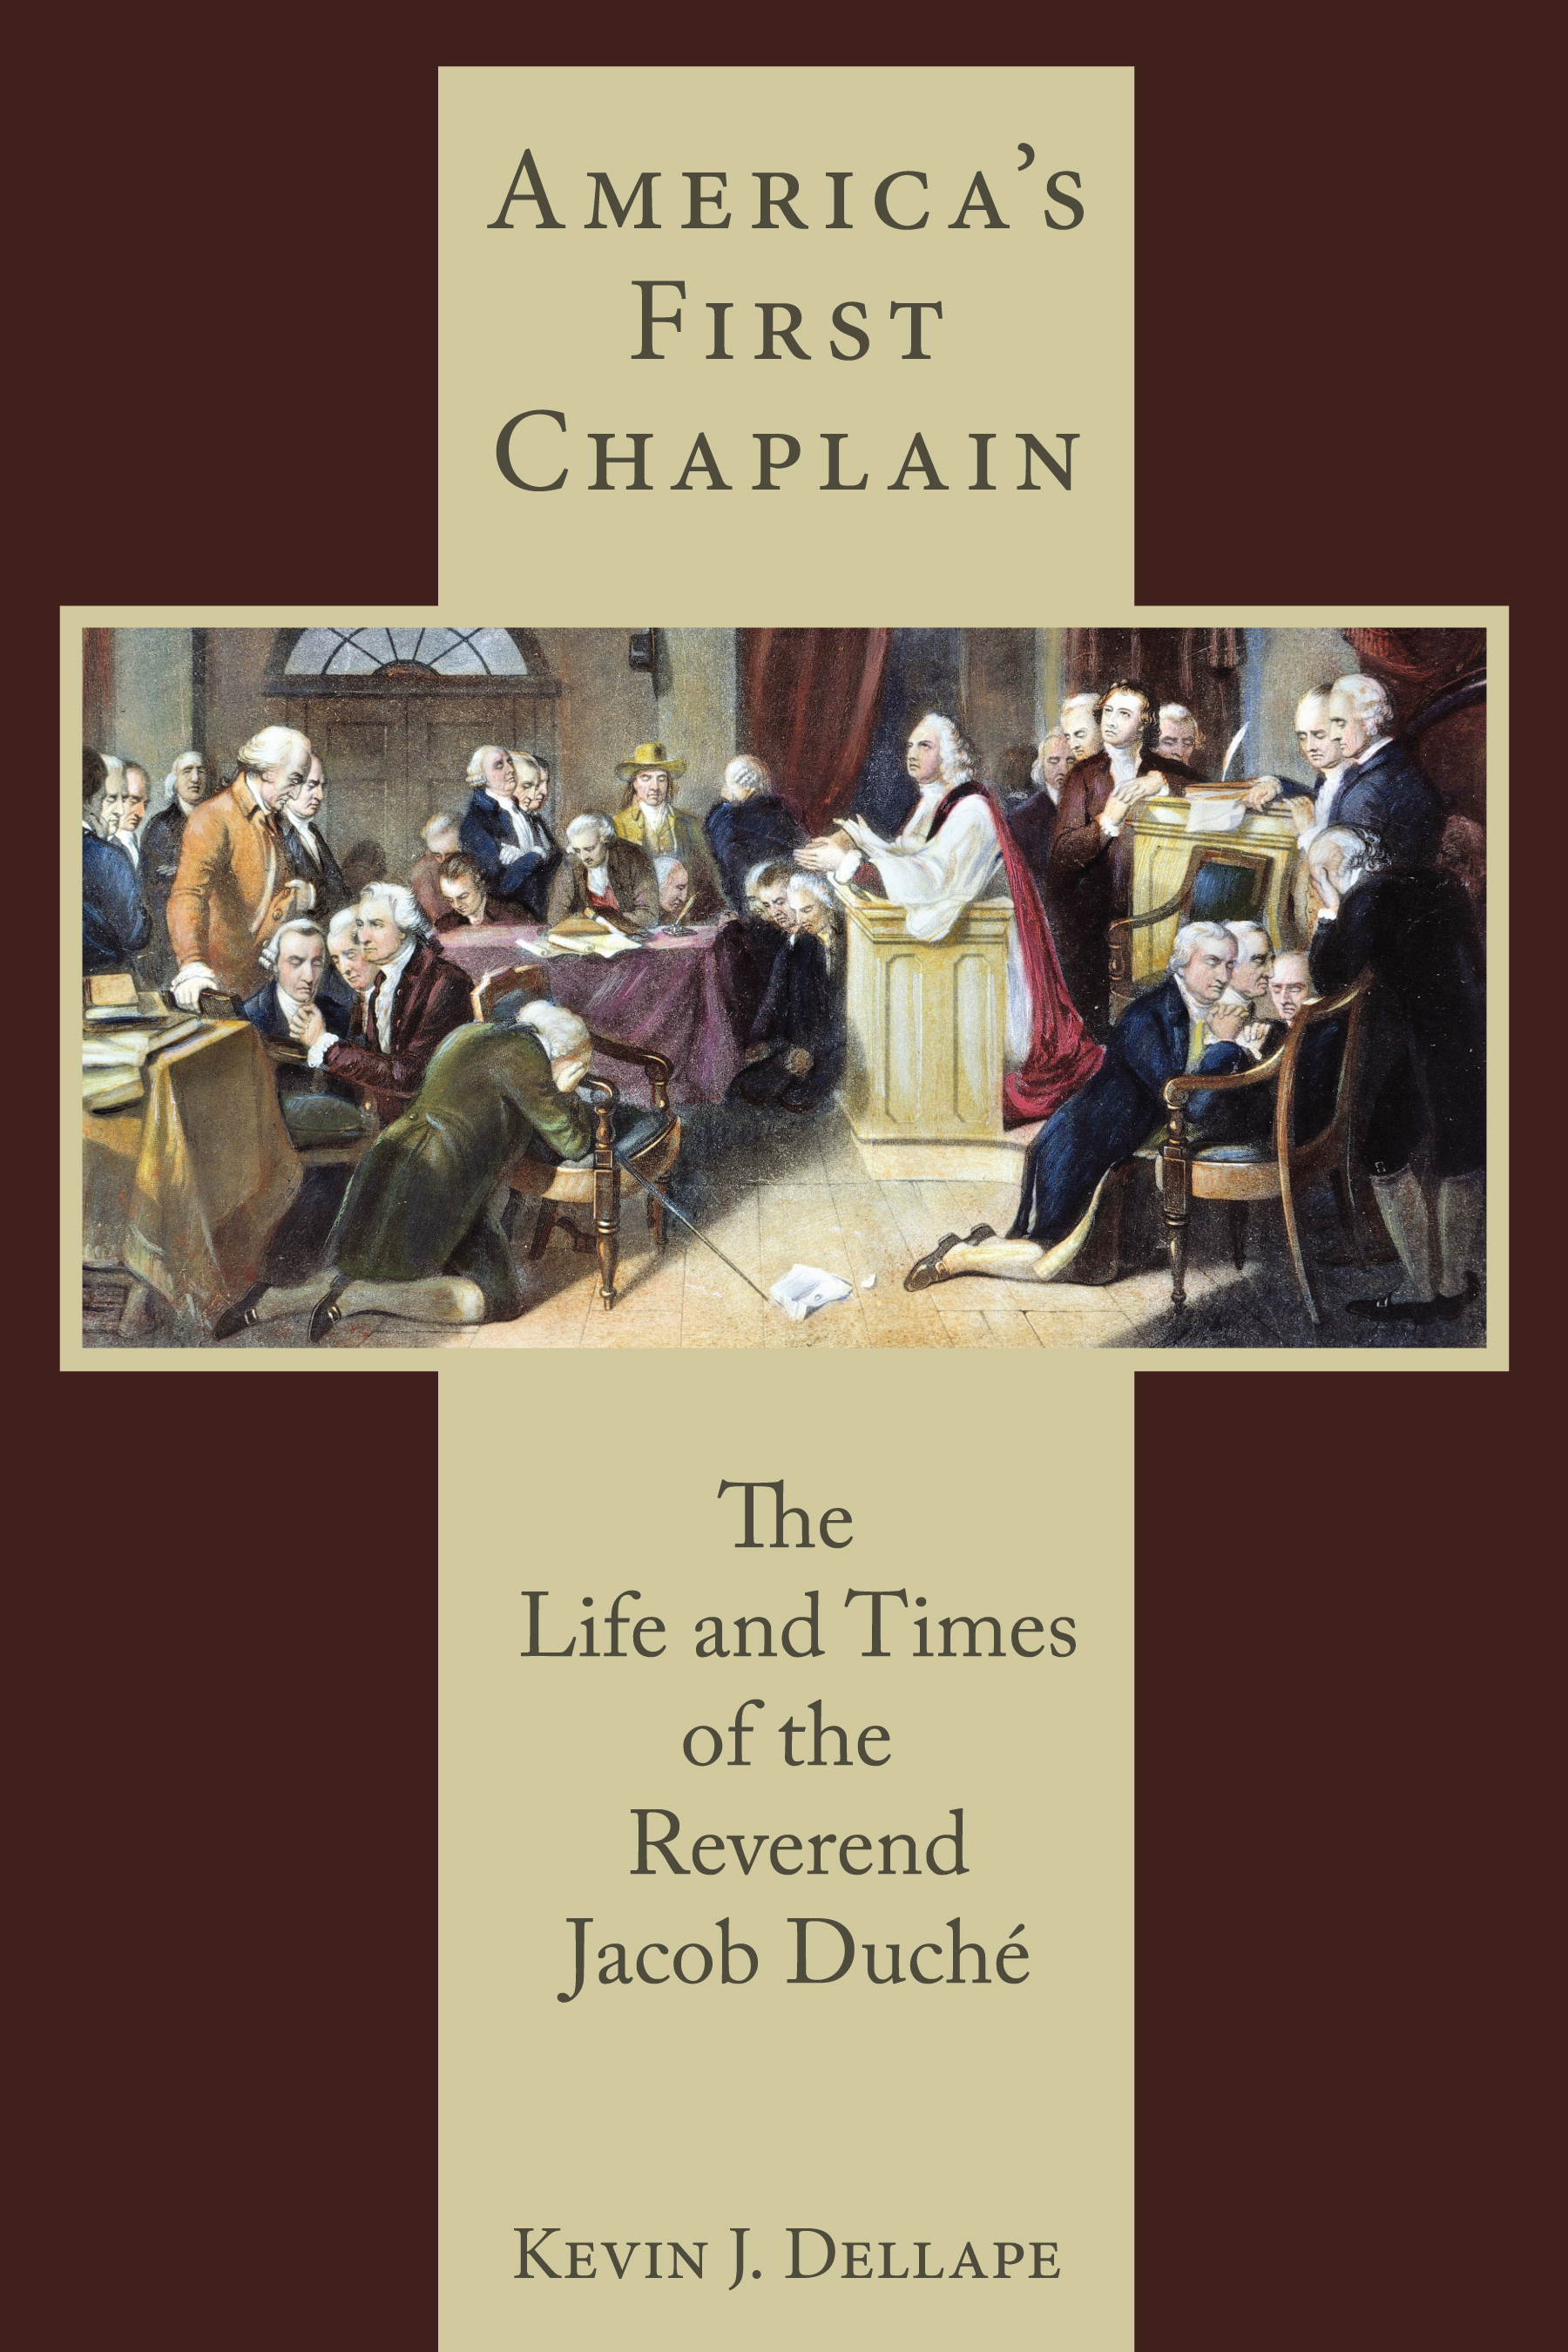 America's First Chaplain: The Life and Times of the Reverend Jacob Duché